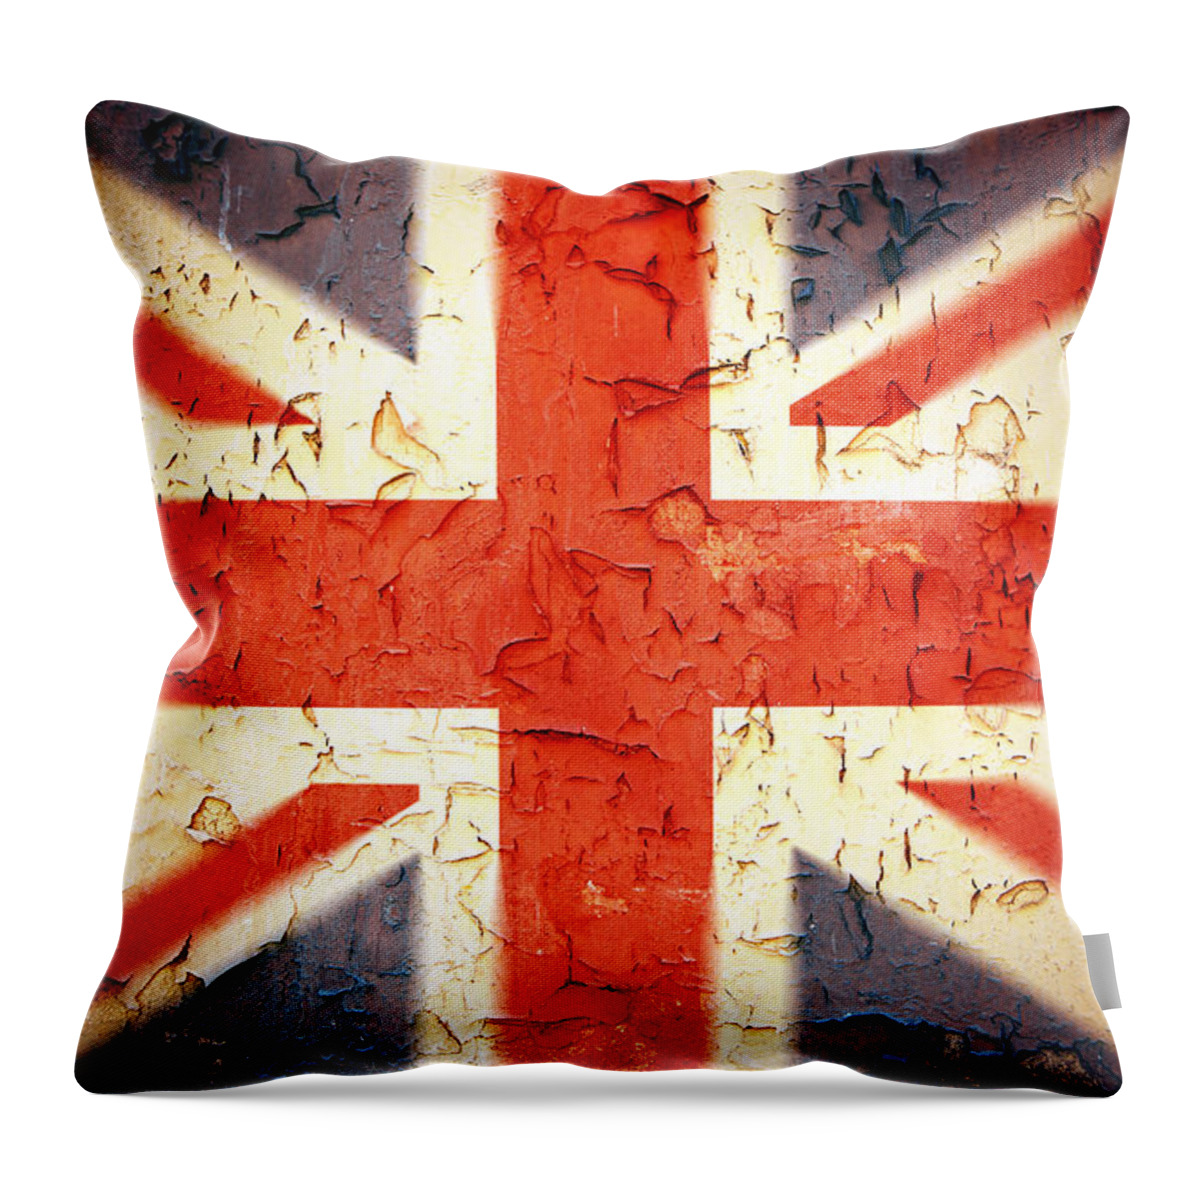 Aged Throw Pillow featuring the photograph Vintage Union Jack by Jane Rix